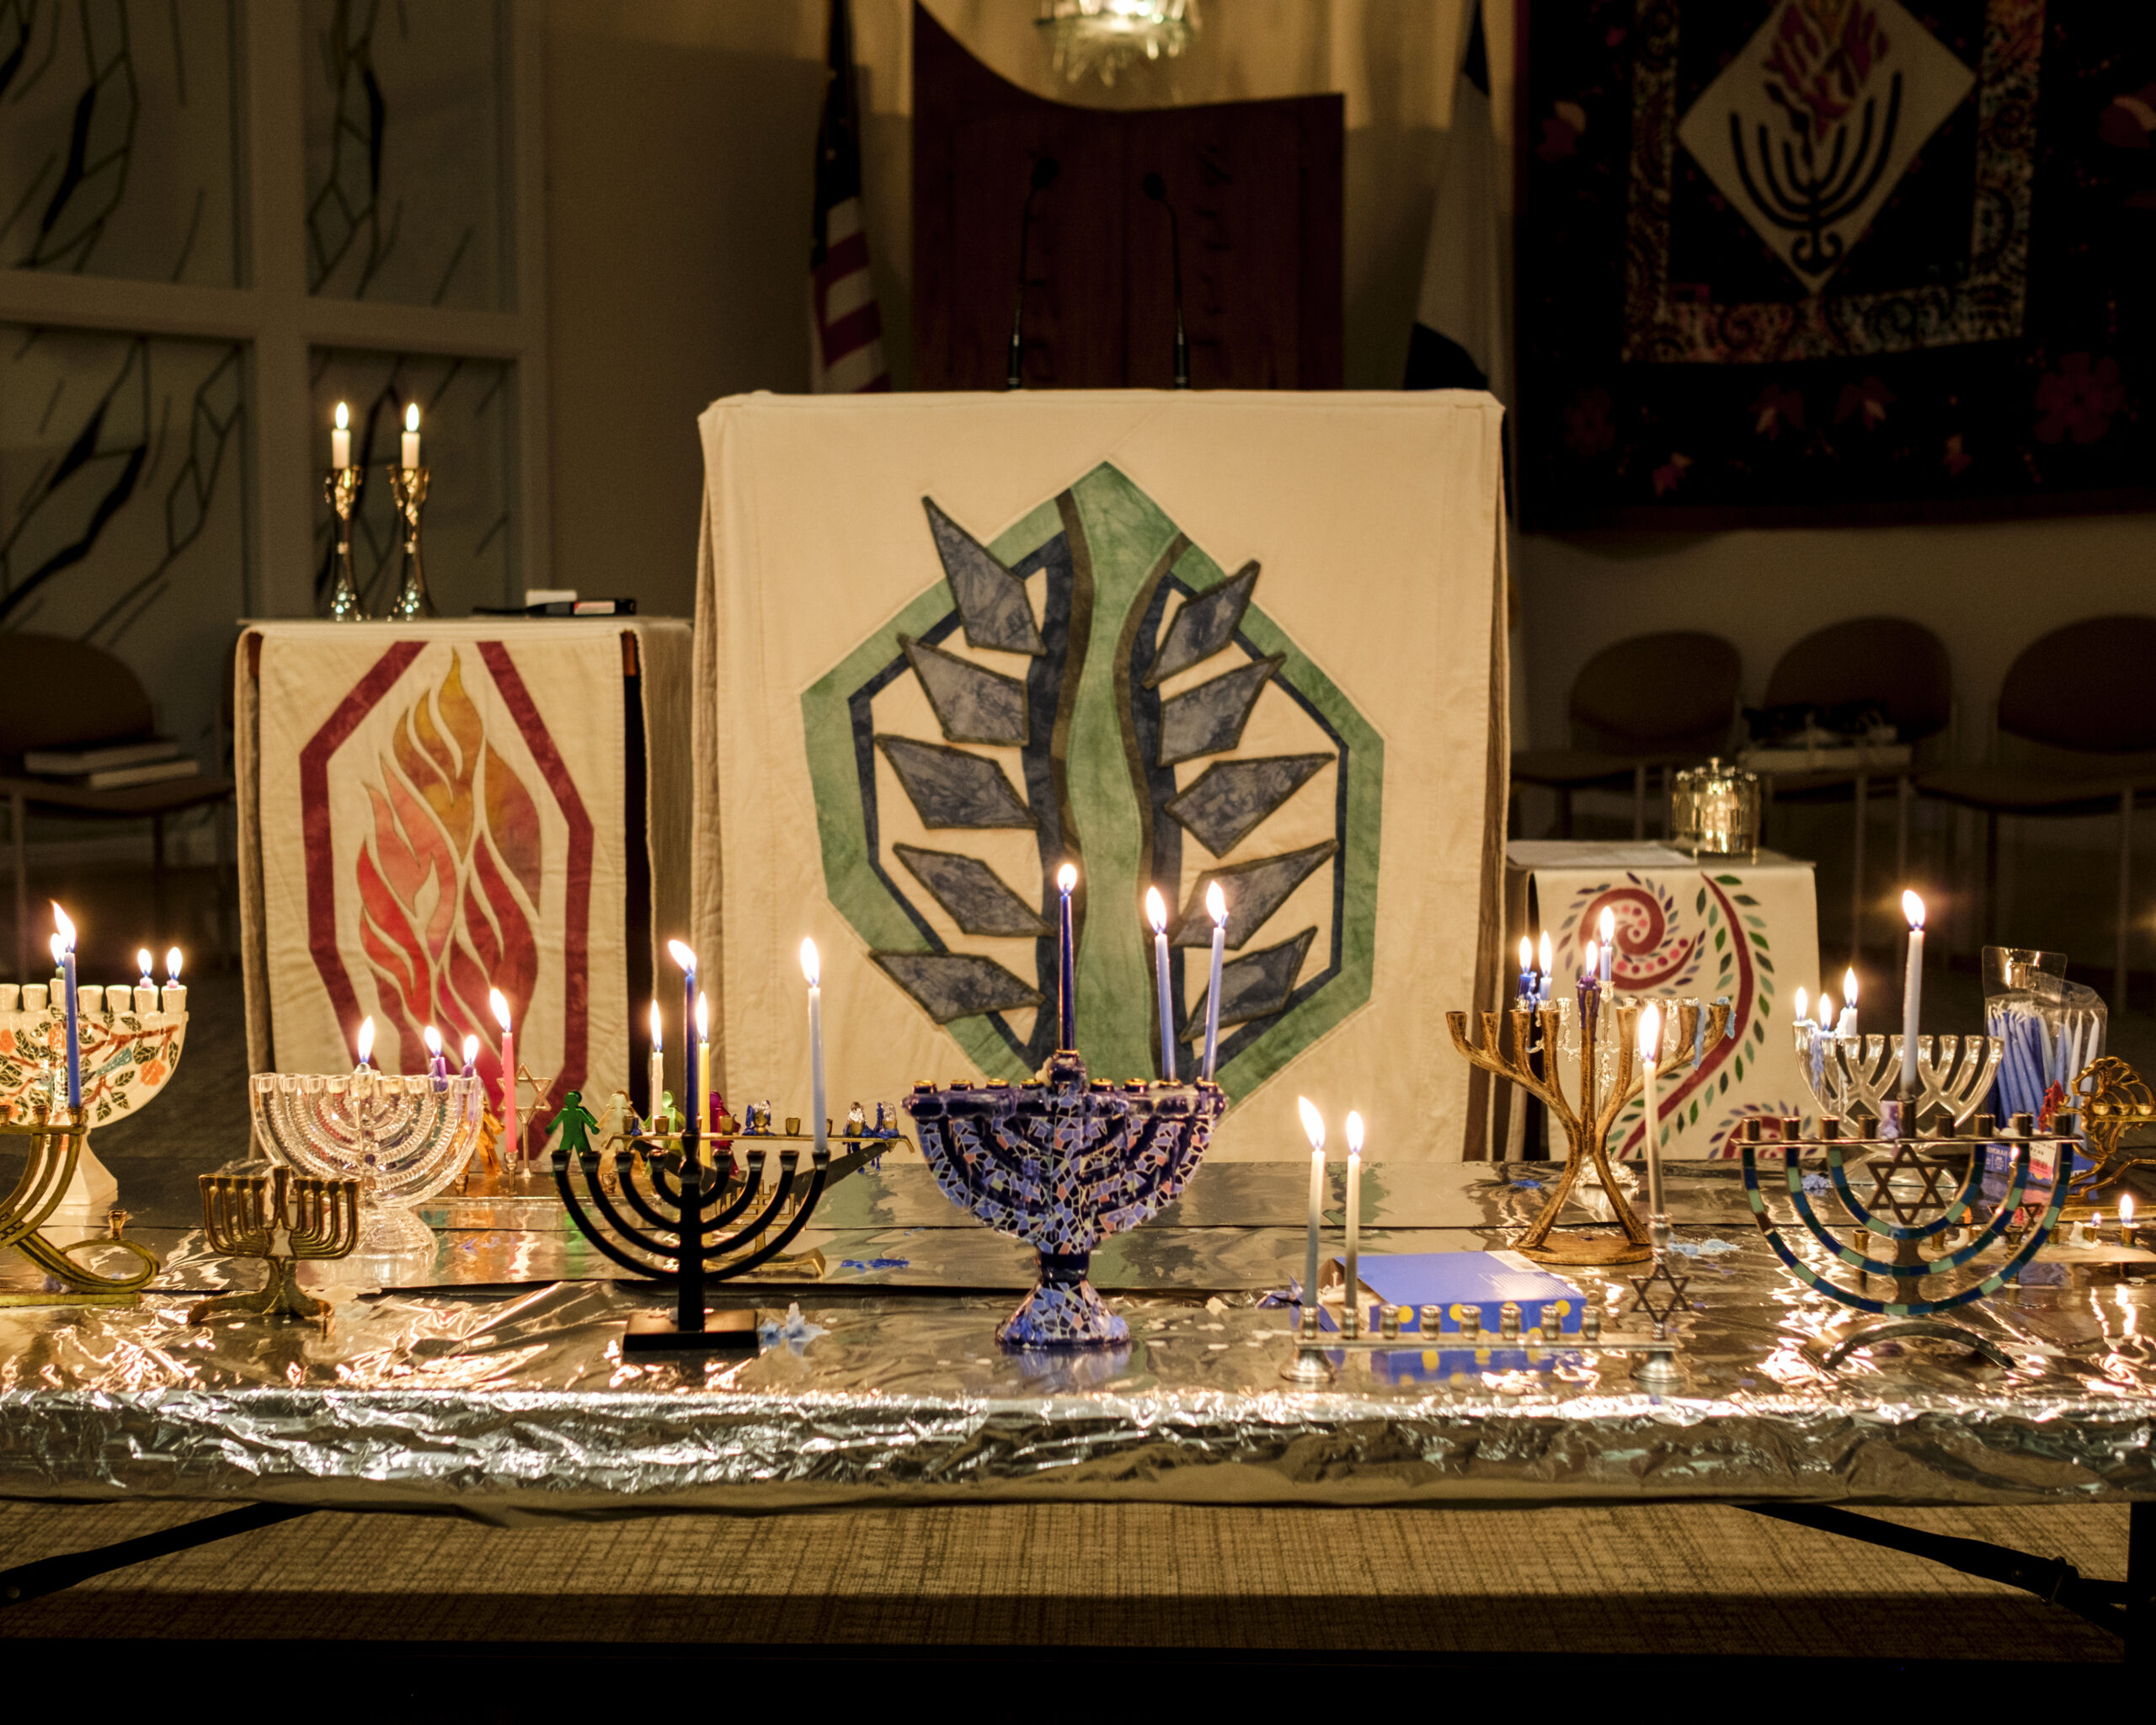 A table holds numerous menorahs with lighted candles
